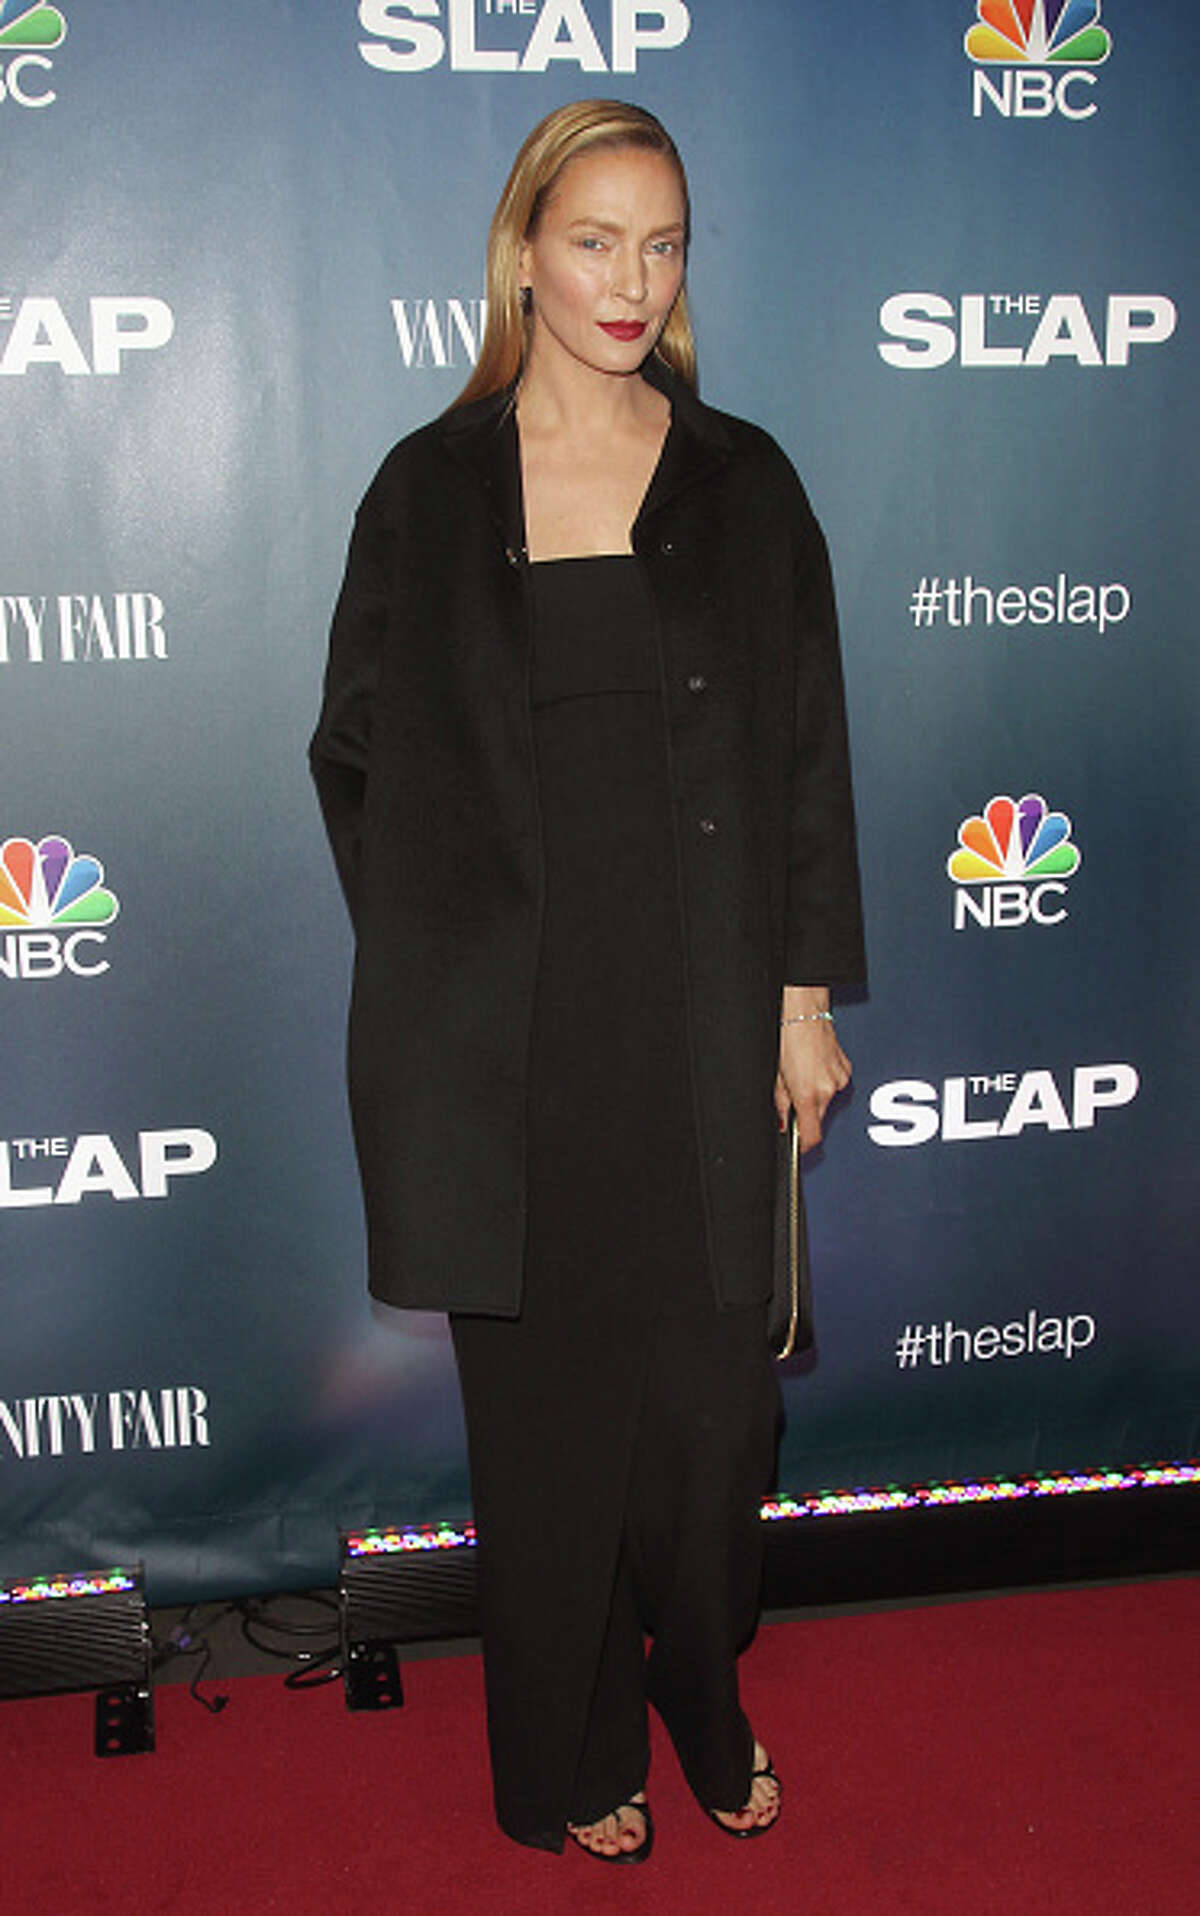 NEW YORK, NY - FEBRUARY 09: Actress Uma Thurman attends "The Slap" premiere party at The New Museum on February 9, 2015 in New York City. (Photo by Jim Spellman/WireImage)